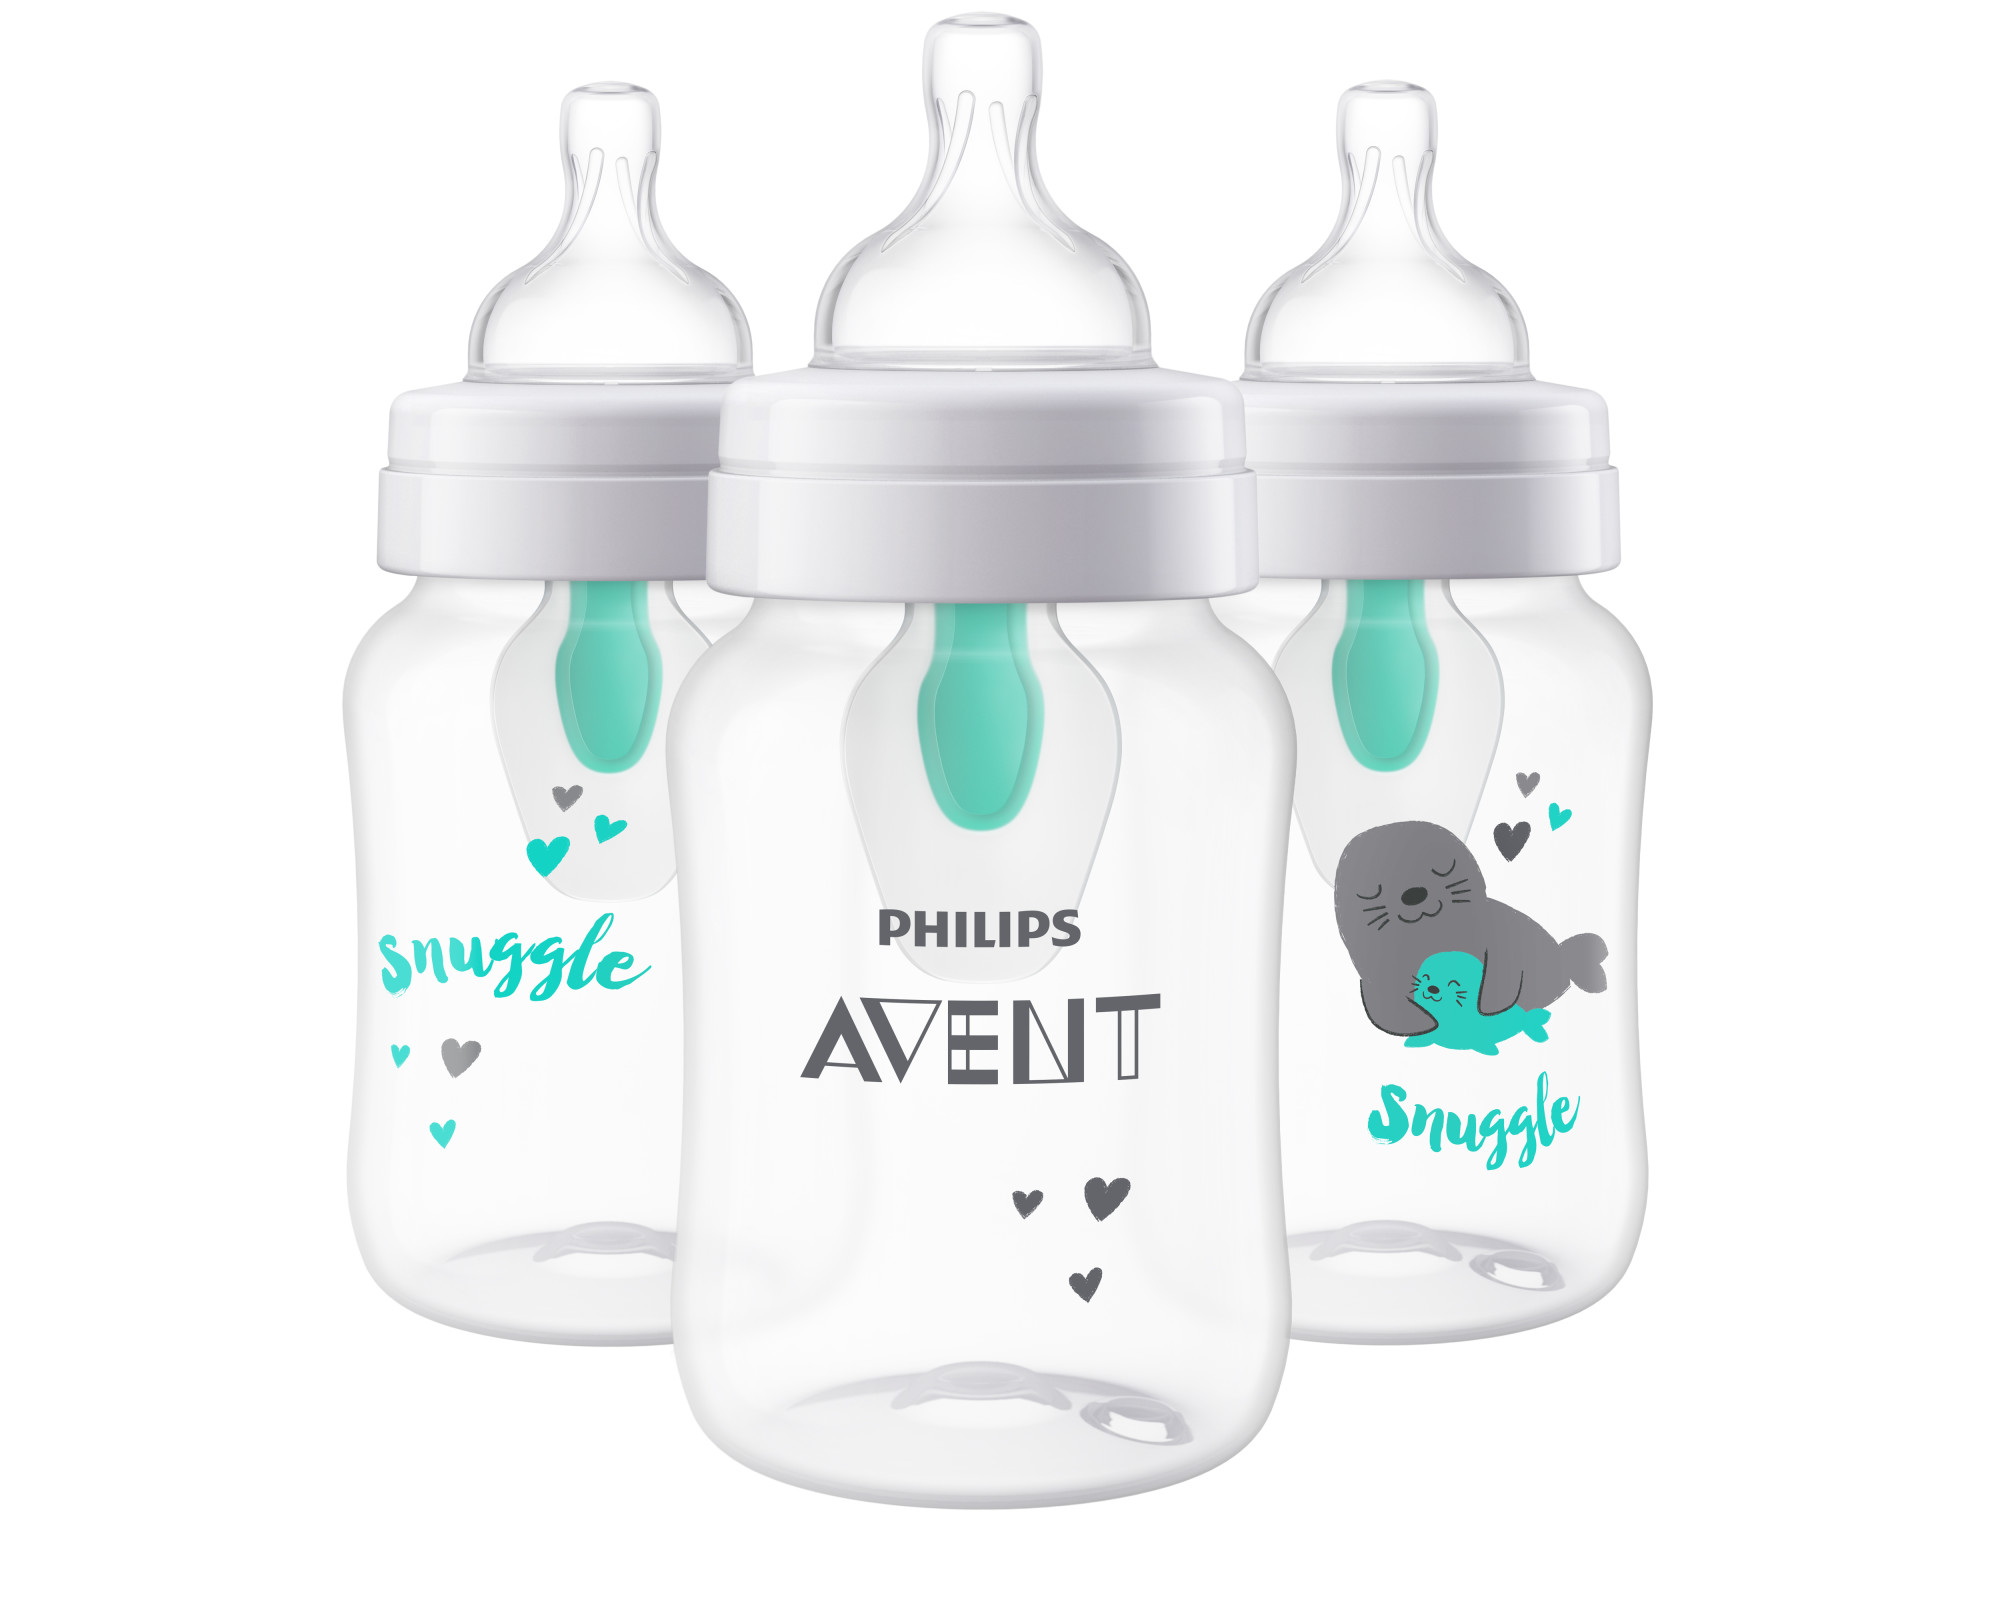 Philips Avent Anti-colic Baby Bottle with AirFree Vent with Seal Design, 9oz, 3pk, SCF408/34 - image 1 of 6